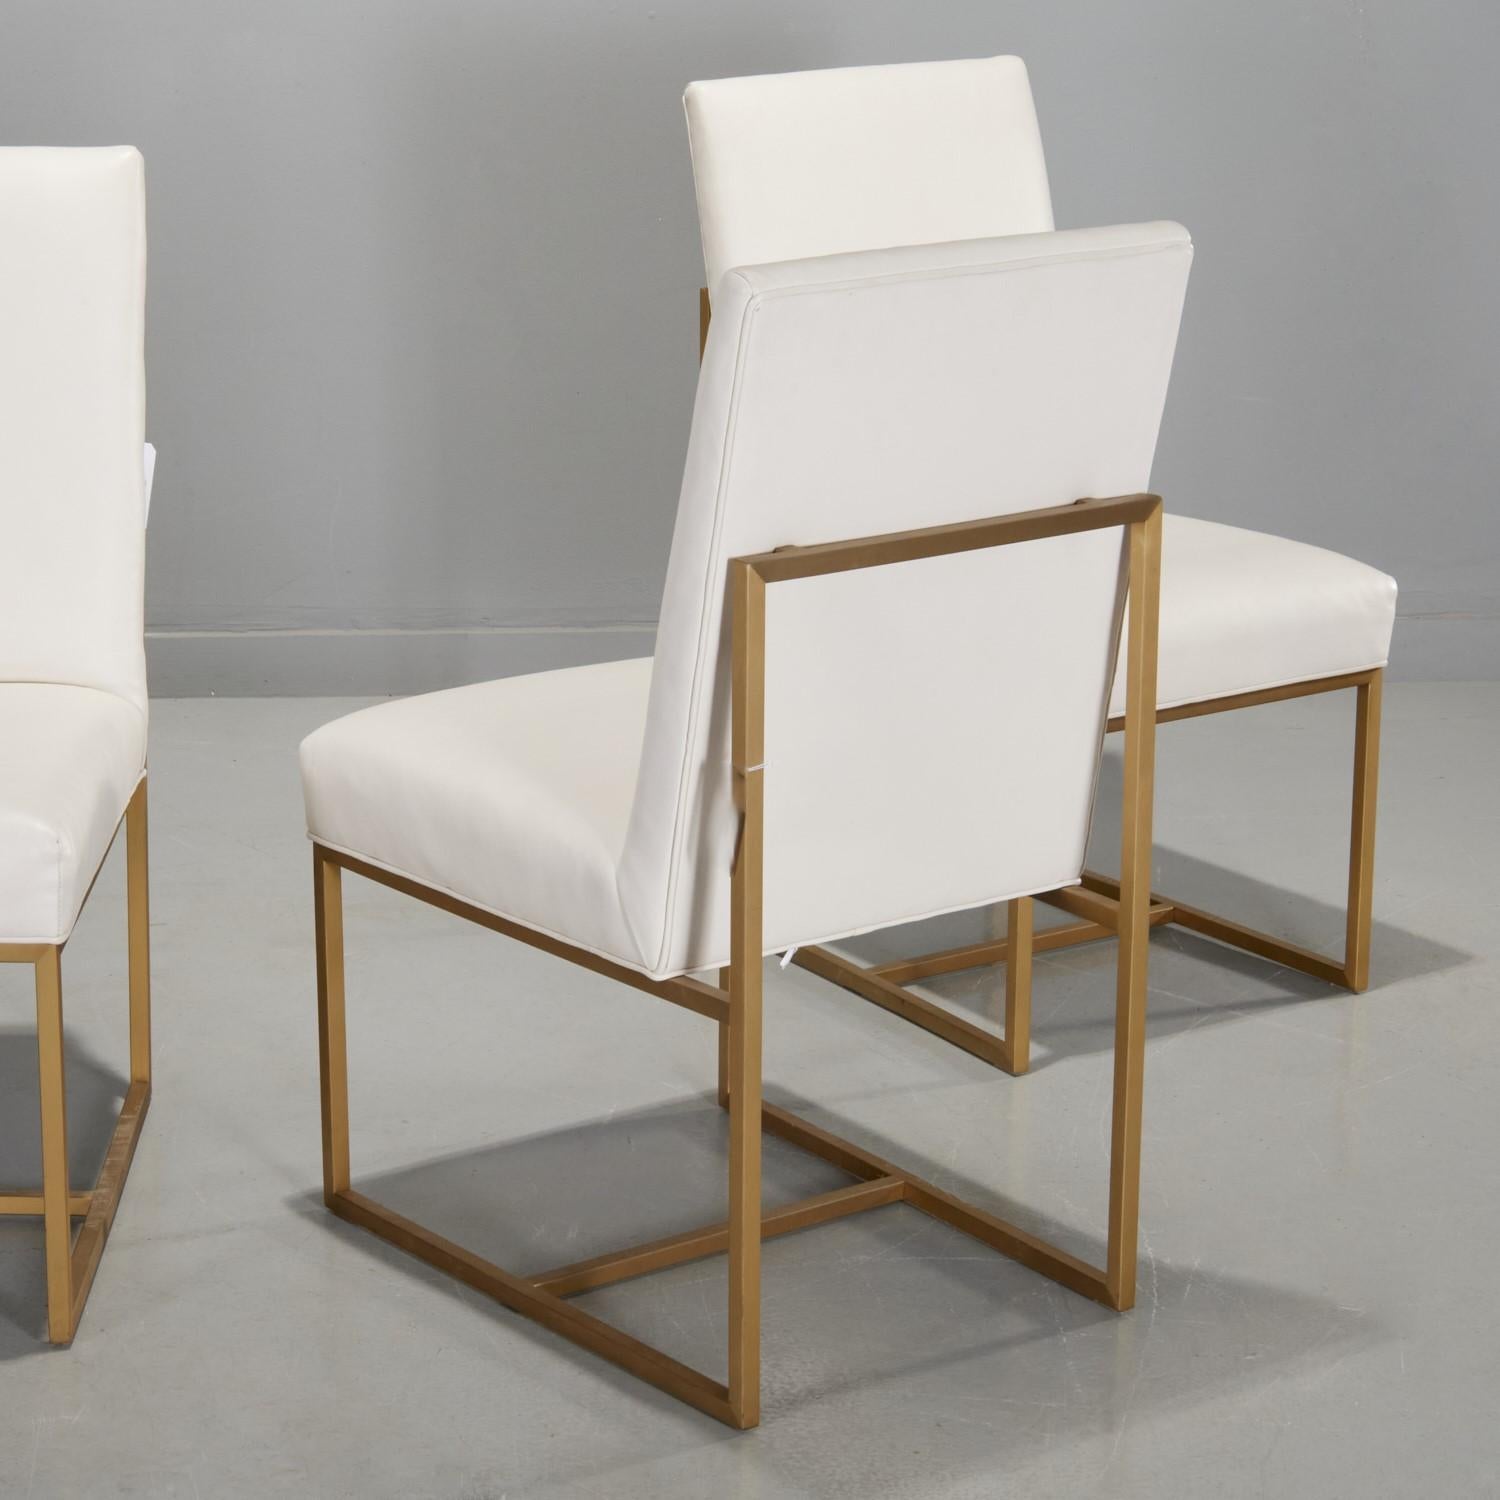 21st c.,  A set of four custom contemporary white leather side chairs in the style of Milo Baughman, with gilt metal frames, unmarked.  These chairs are from a residence decorated by the incomparable designer/architect  Daniel Romualdez who has been